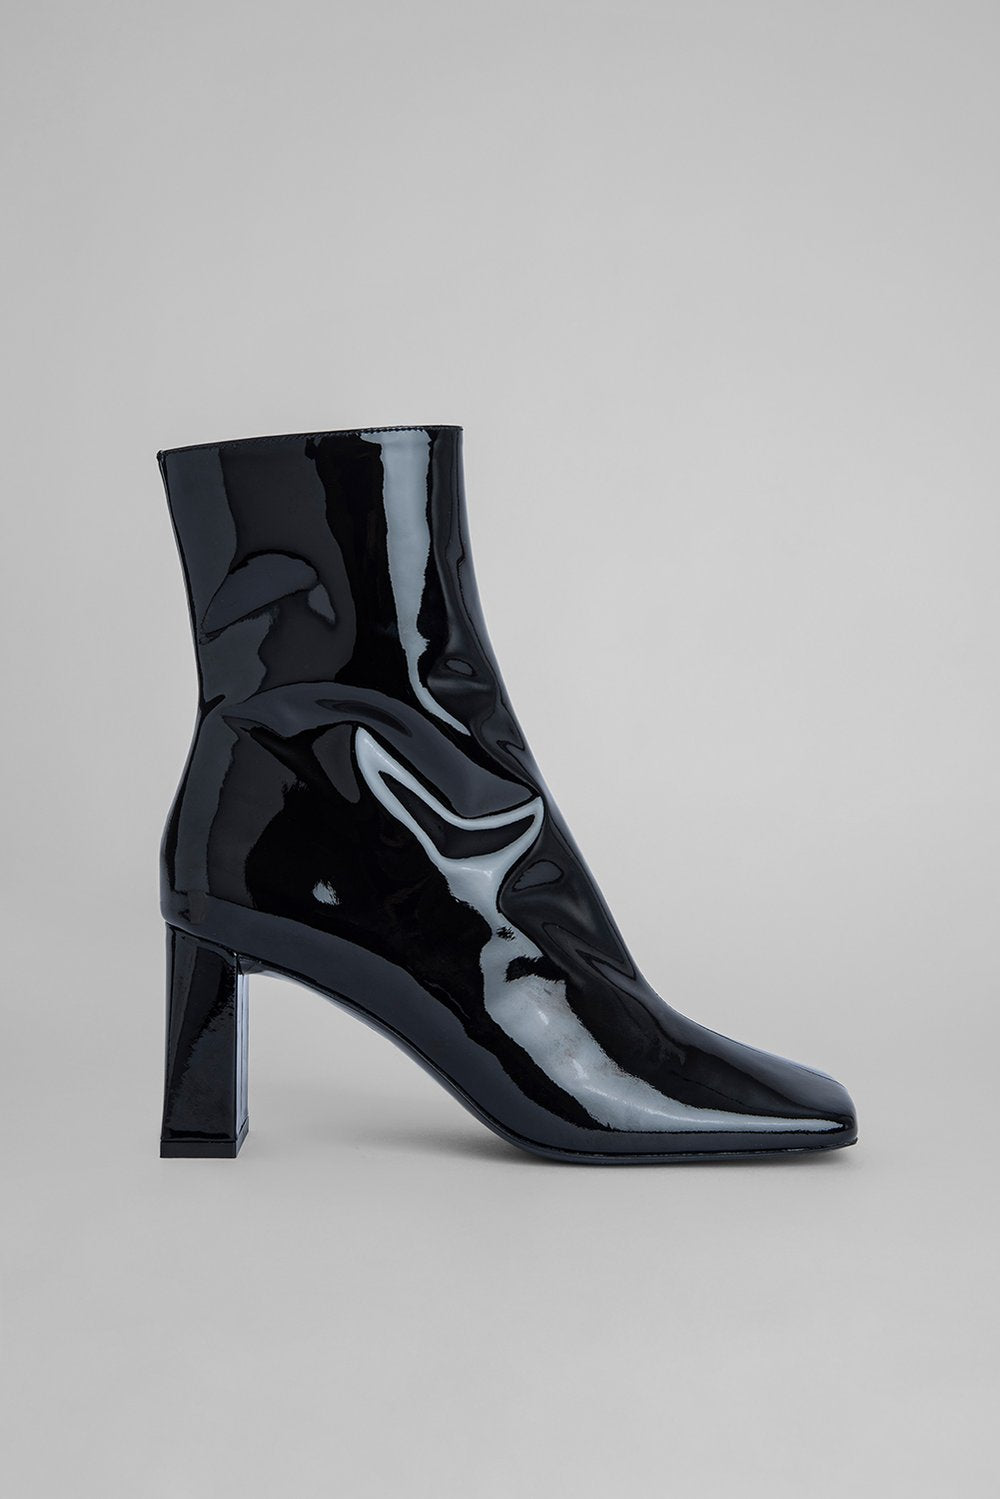 BY FAR CELINE BLACK PATENT LEATHER BOOTS